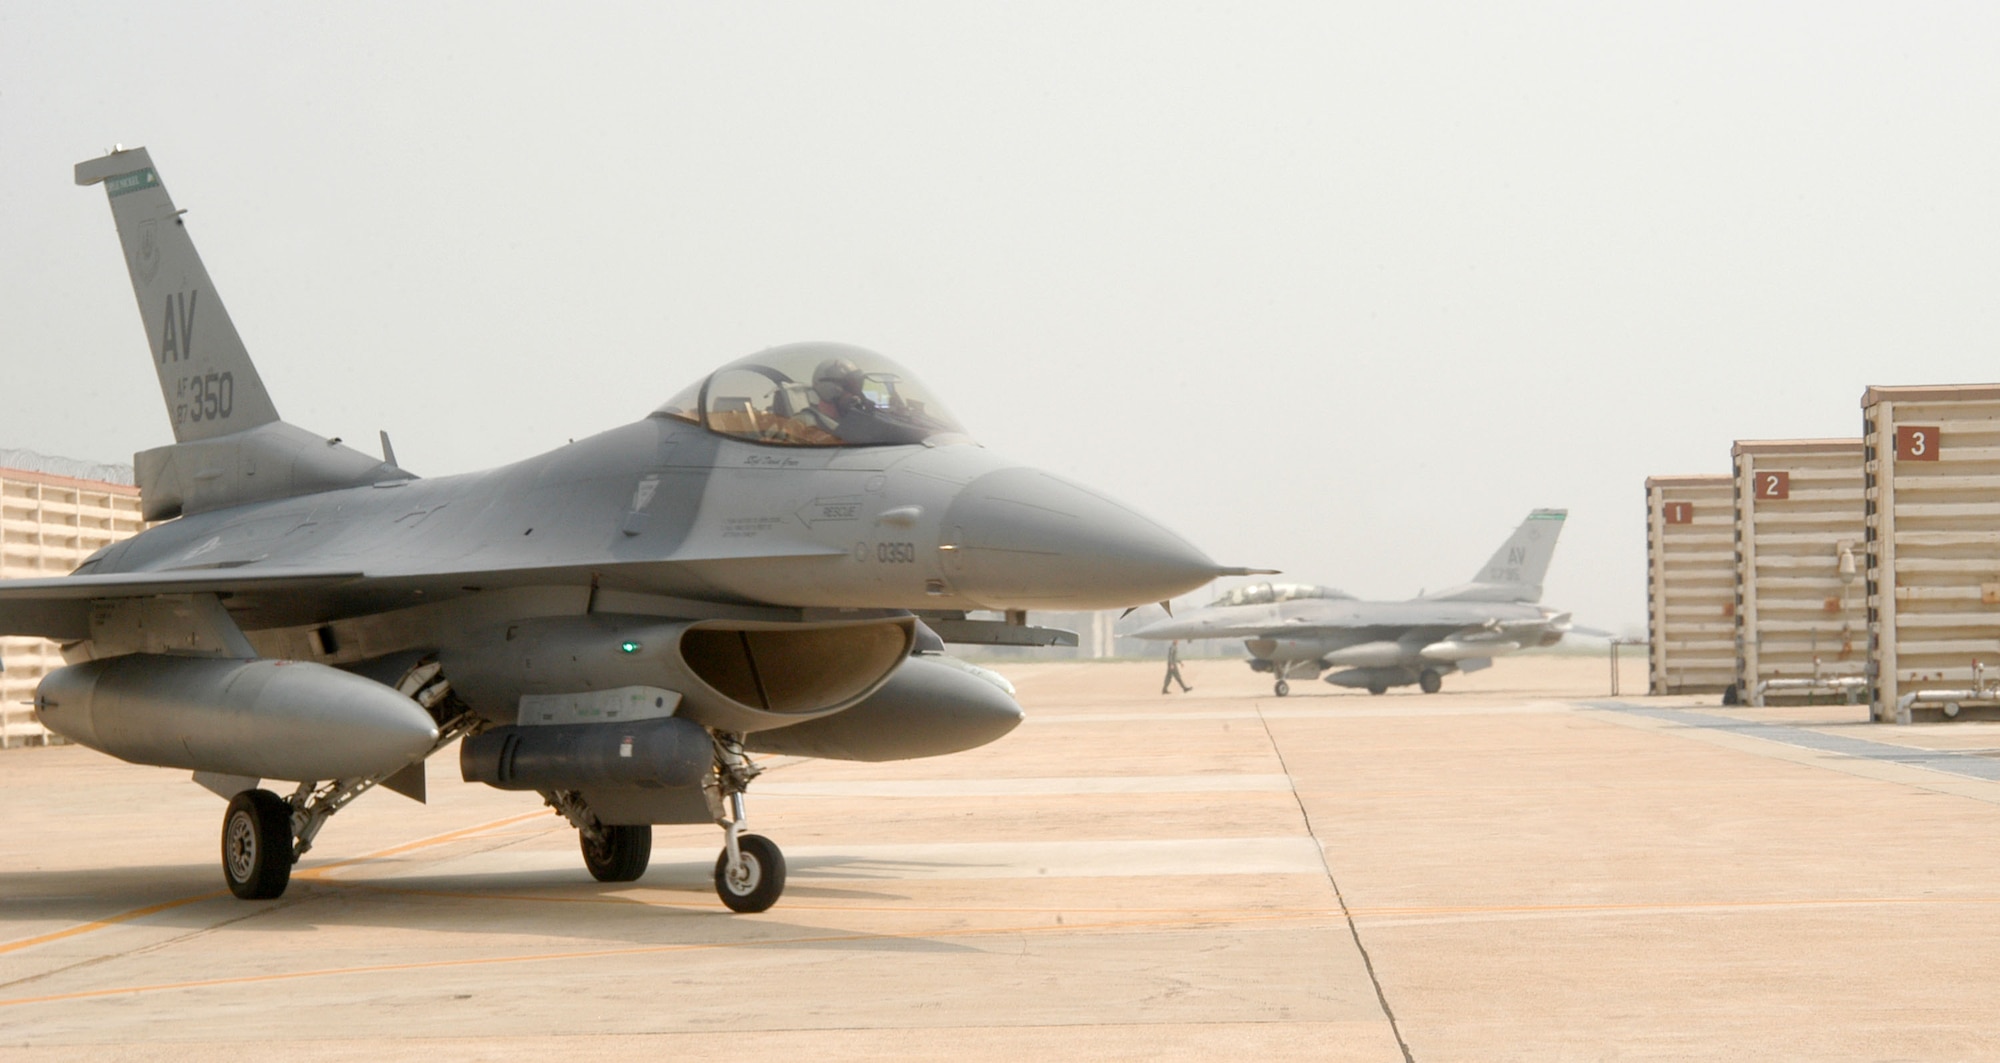 KUNSAN AIR BASE, Republic of Korea -- Pilots from the 555th Expeditionary Fighter Squadron "Triple Nickel" guide their F-16 Fighting Falcons in to Kunsan's Panton pad July 7 after arriving from Alaska. More than 10 aircraft assigned to 555th EFS arrived here from "The Last Frontier" state after being hampered by poor weather conditions. The Triple Nickel is deployed to Kunsan as part of a force posture adjustment in the Northeast Asia region. (U.S. Air Force photo/Senior Airman Stephen Collier)                                                                                                